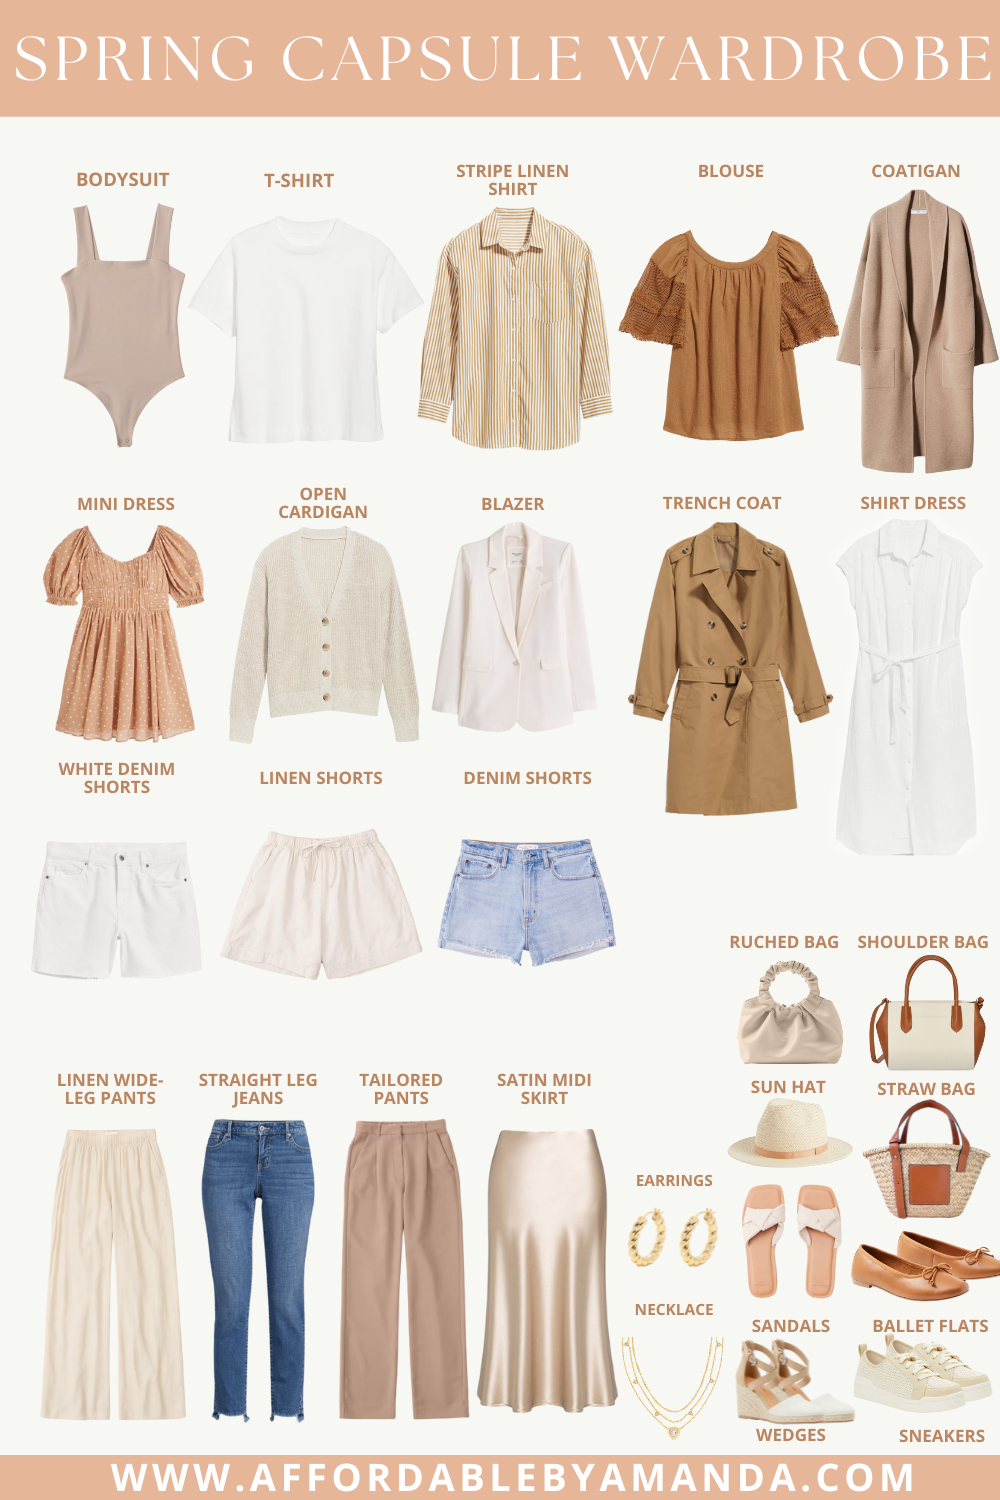 How to Build a Summer Travel Capsule Wardrobe